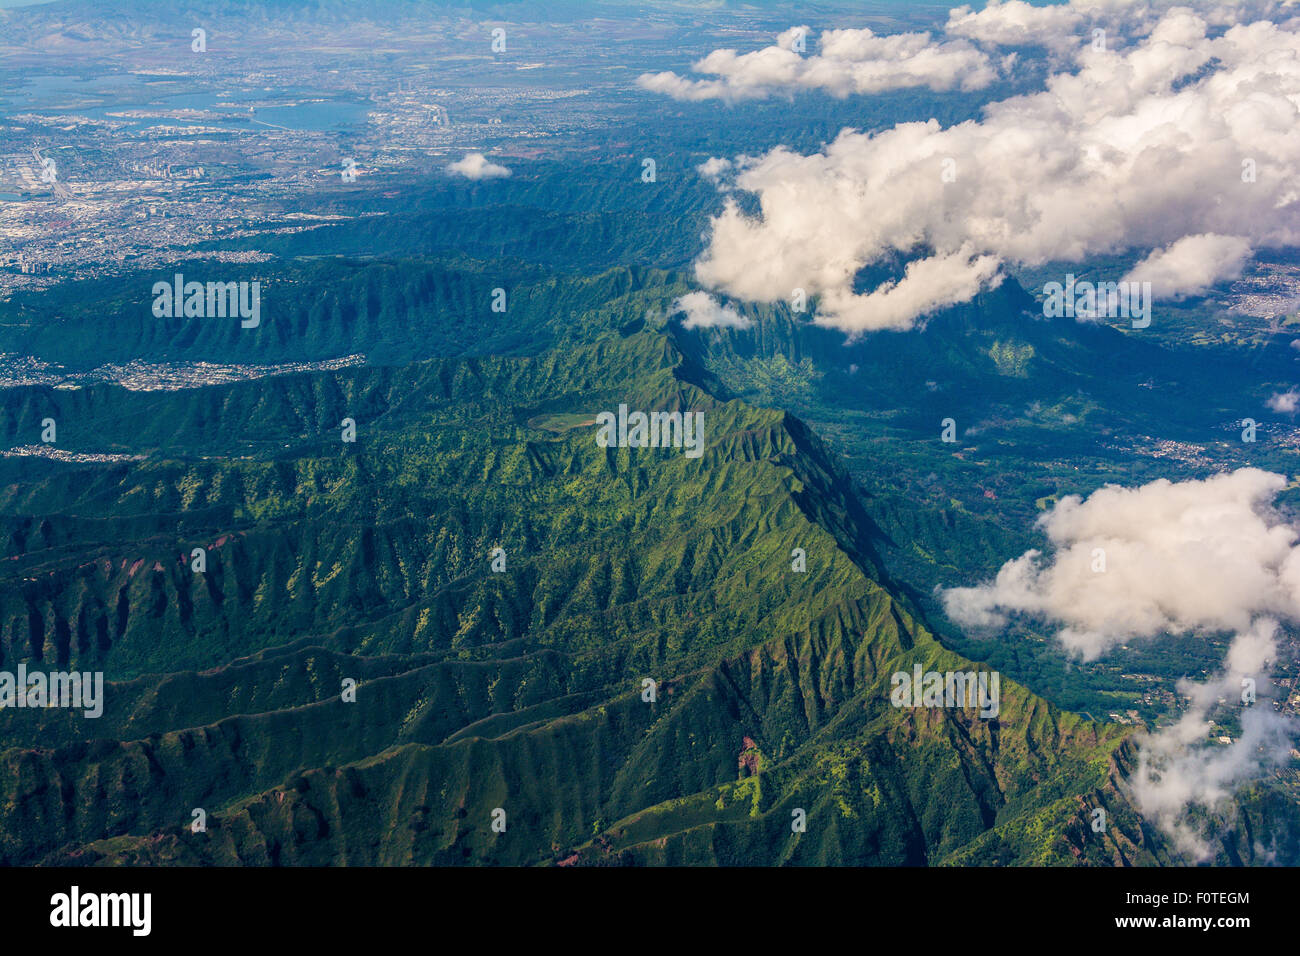 Aerial view of the island of Oahu, Hawaii Stock Photo